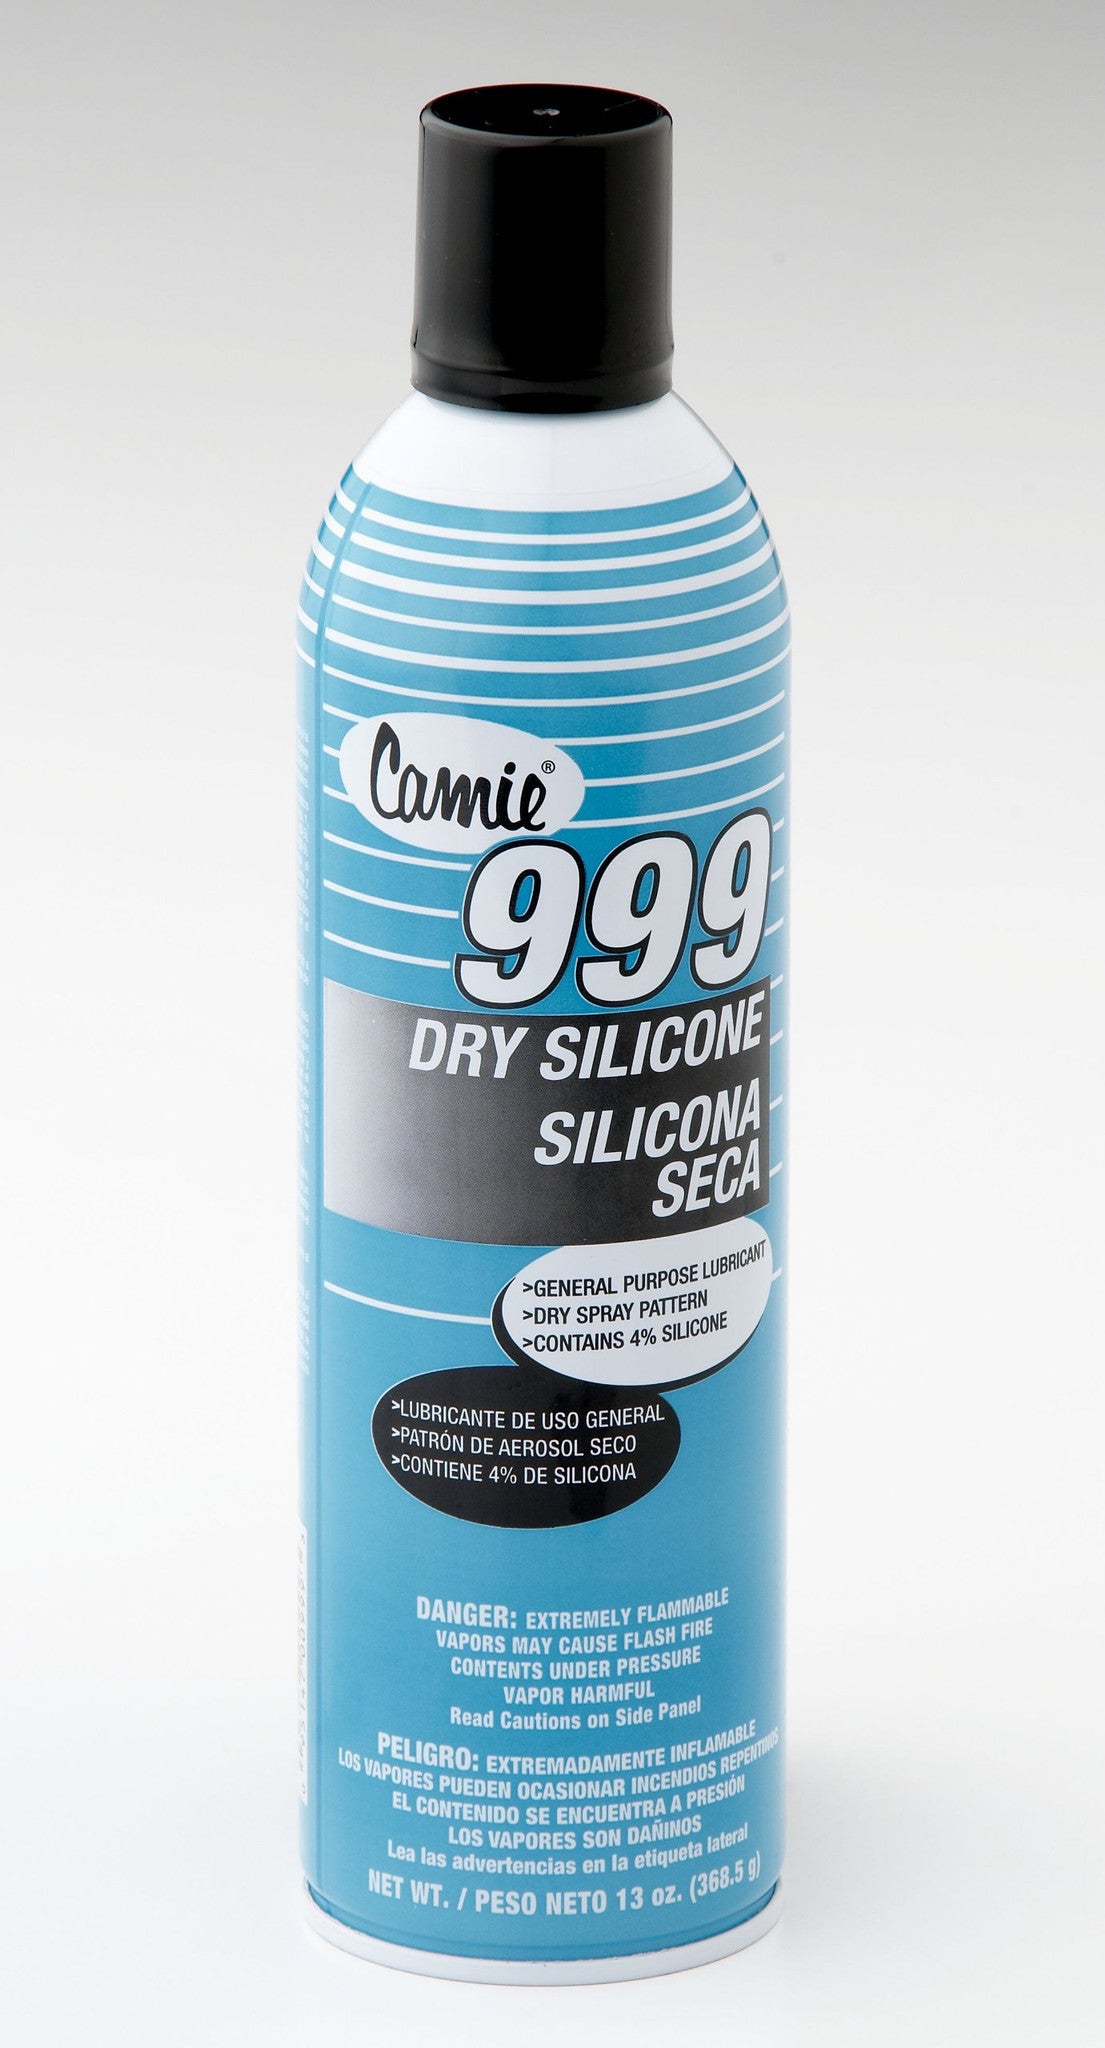 Camie 610 Silicone Release Spray